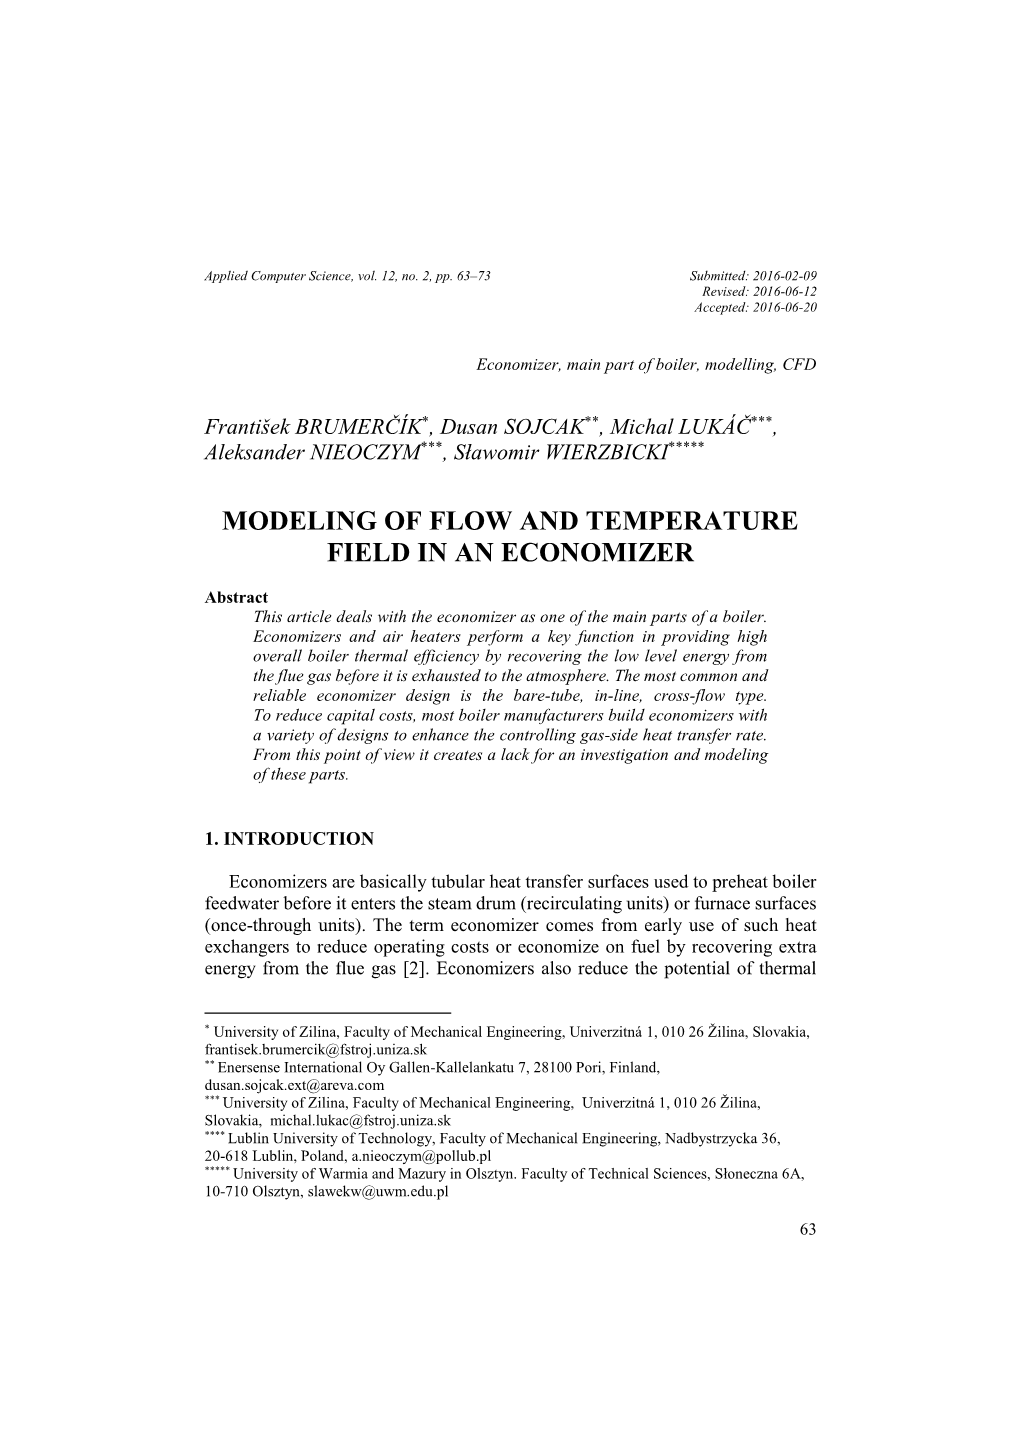 Modeling of Flow and Temperature Field in an Economizer